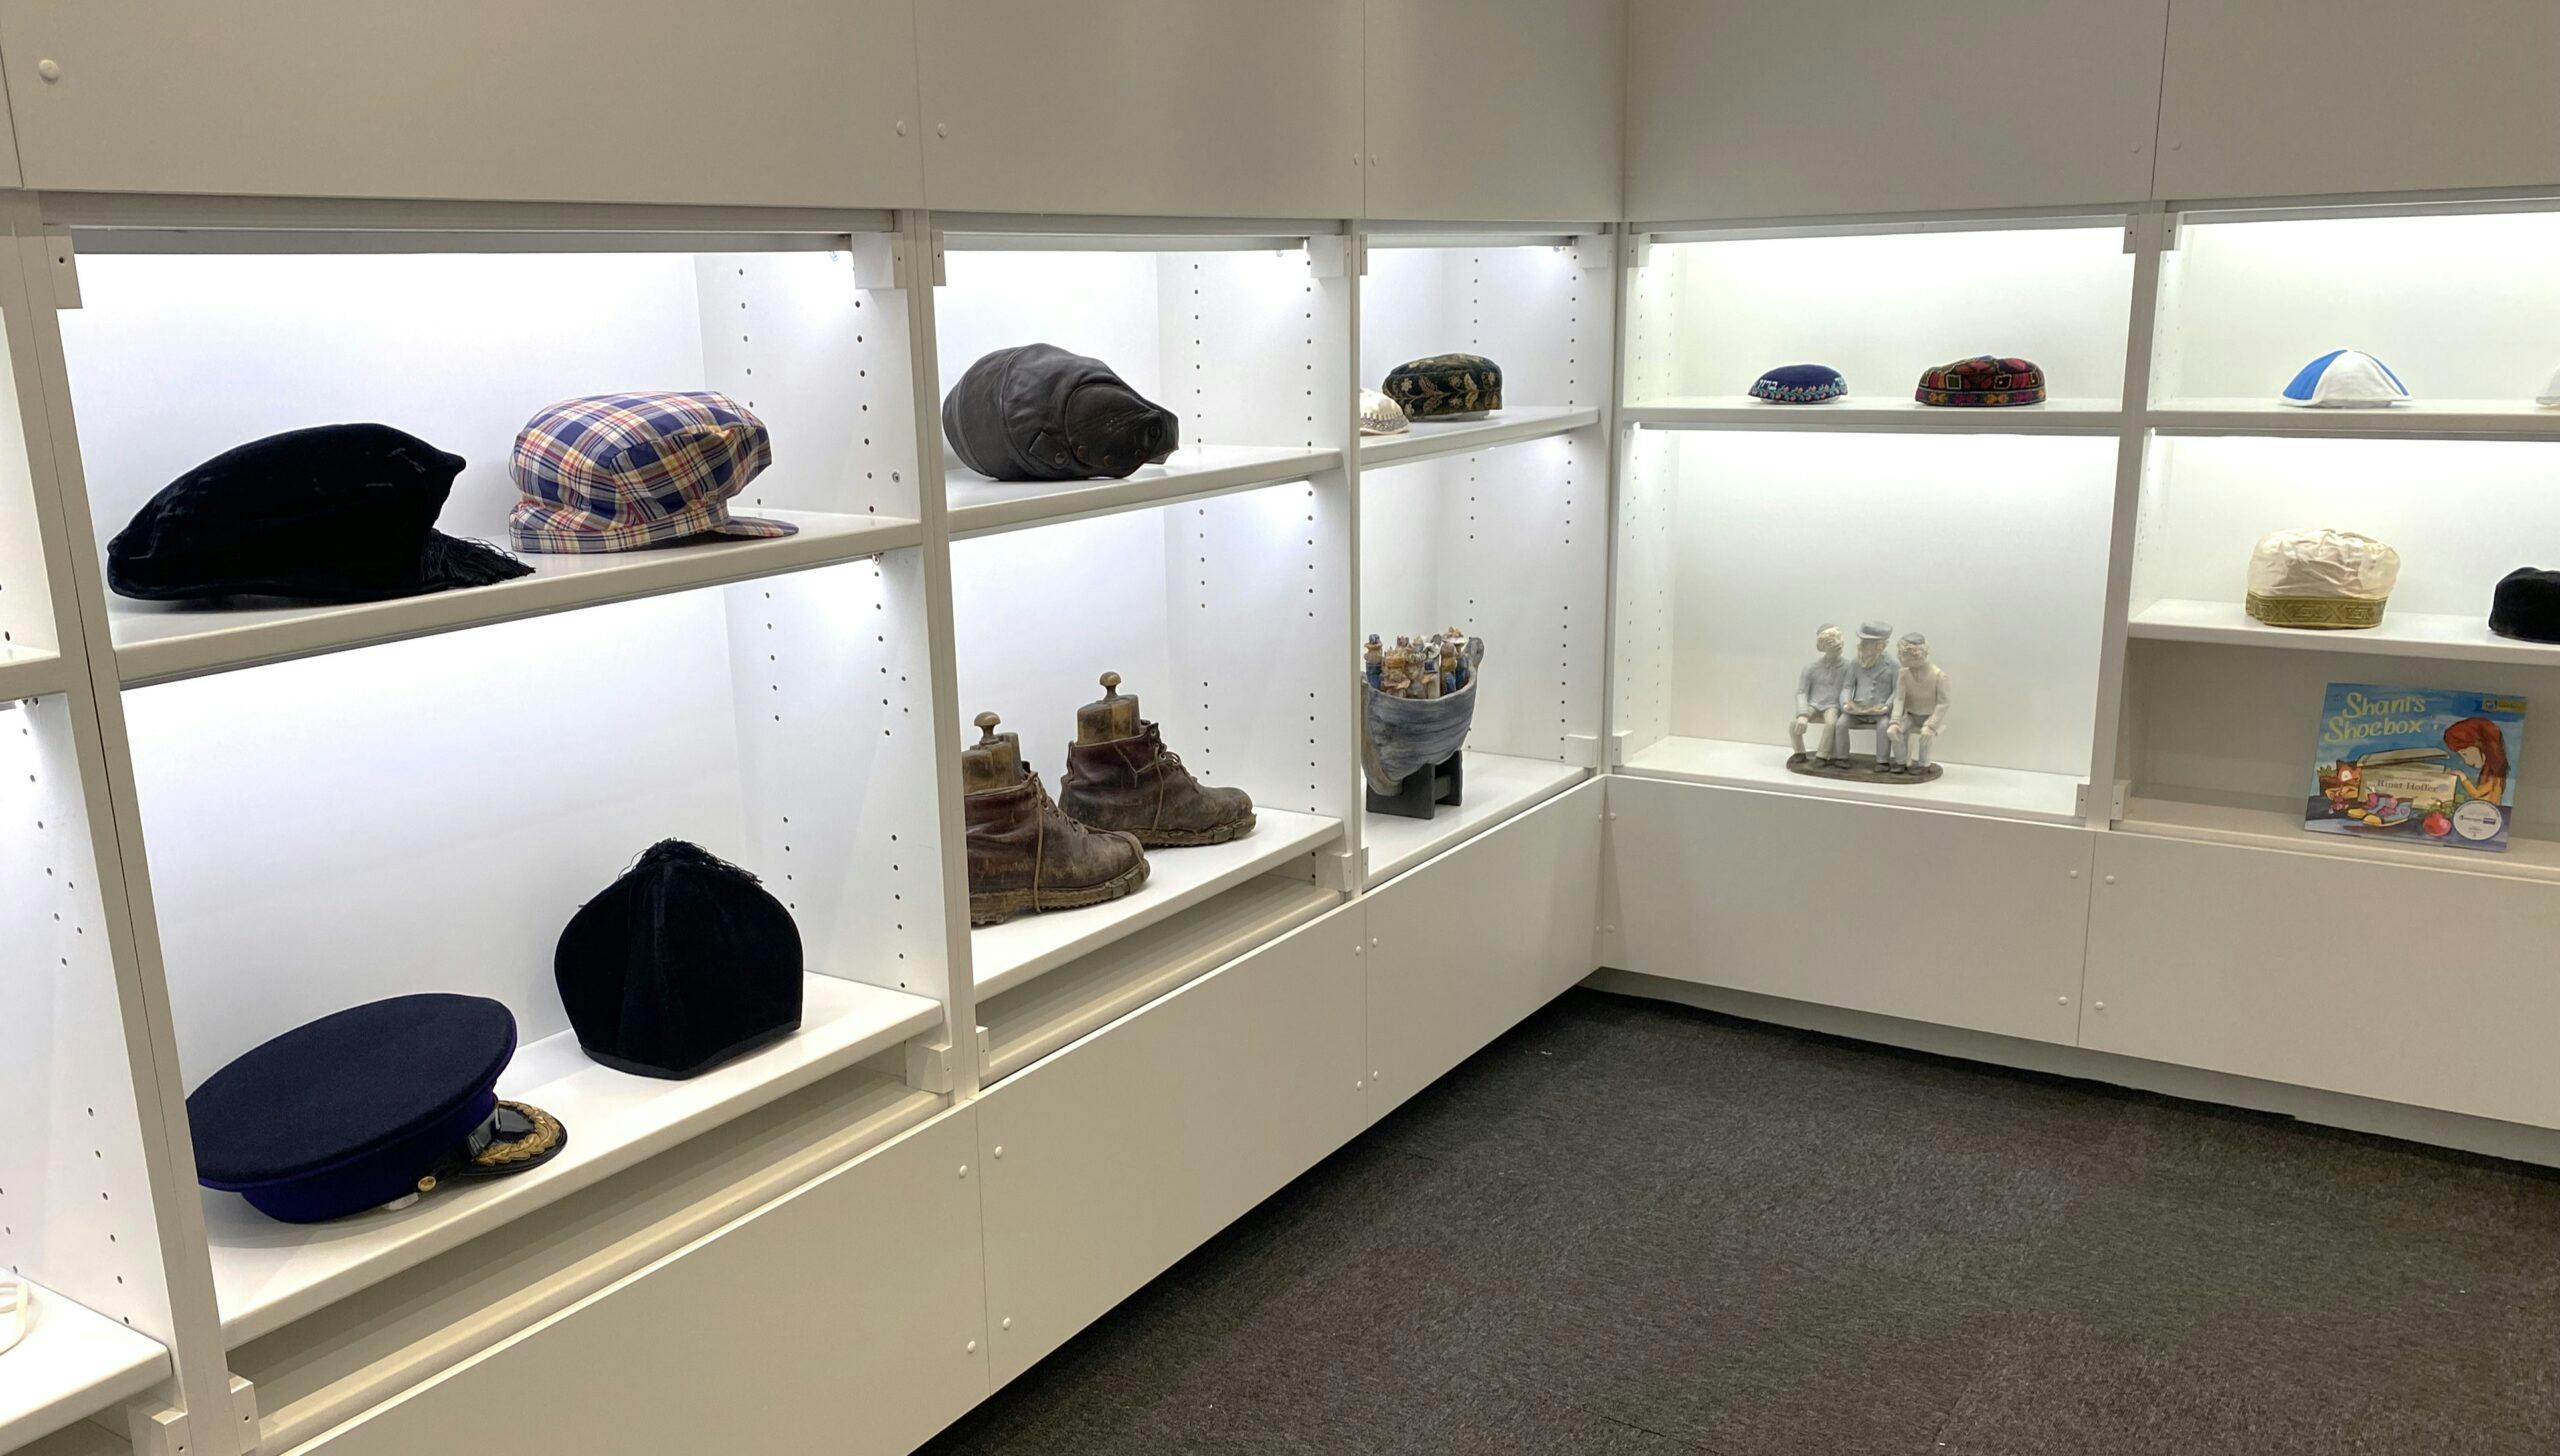 The children's space’s inaugural exhibition, <em>Head to Toe</em>, is a deep-dive into the museum’s collection of garments, headwear, socks and shoes. (Image: Ruby Kraner-Tucci/The Jewish Independent)